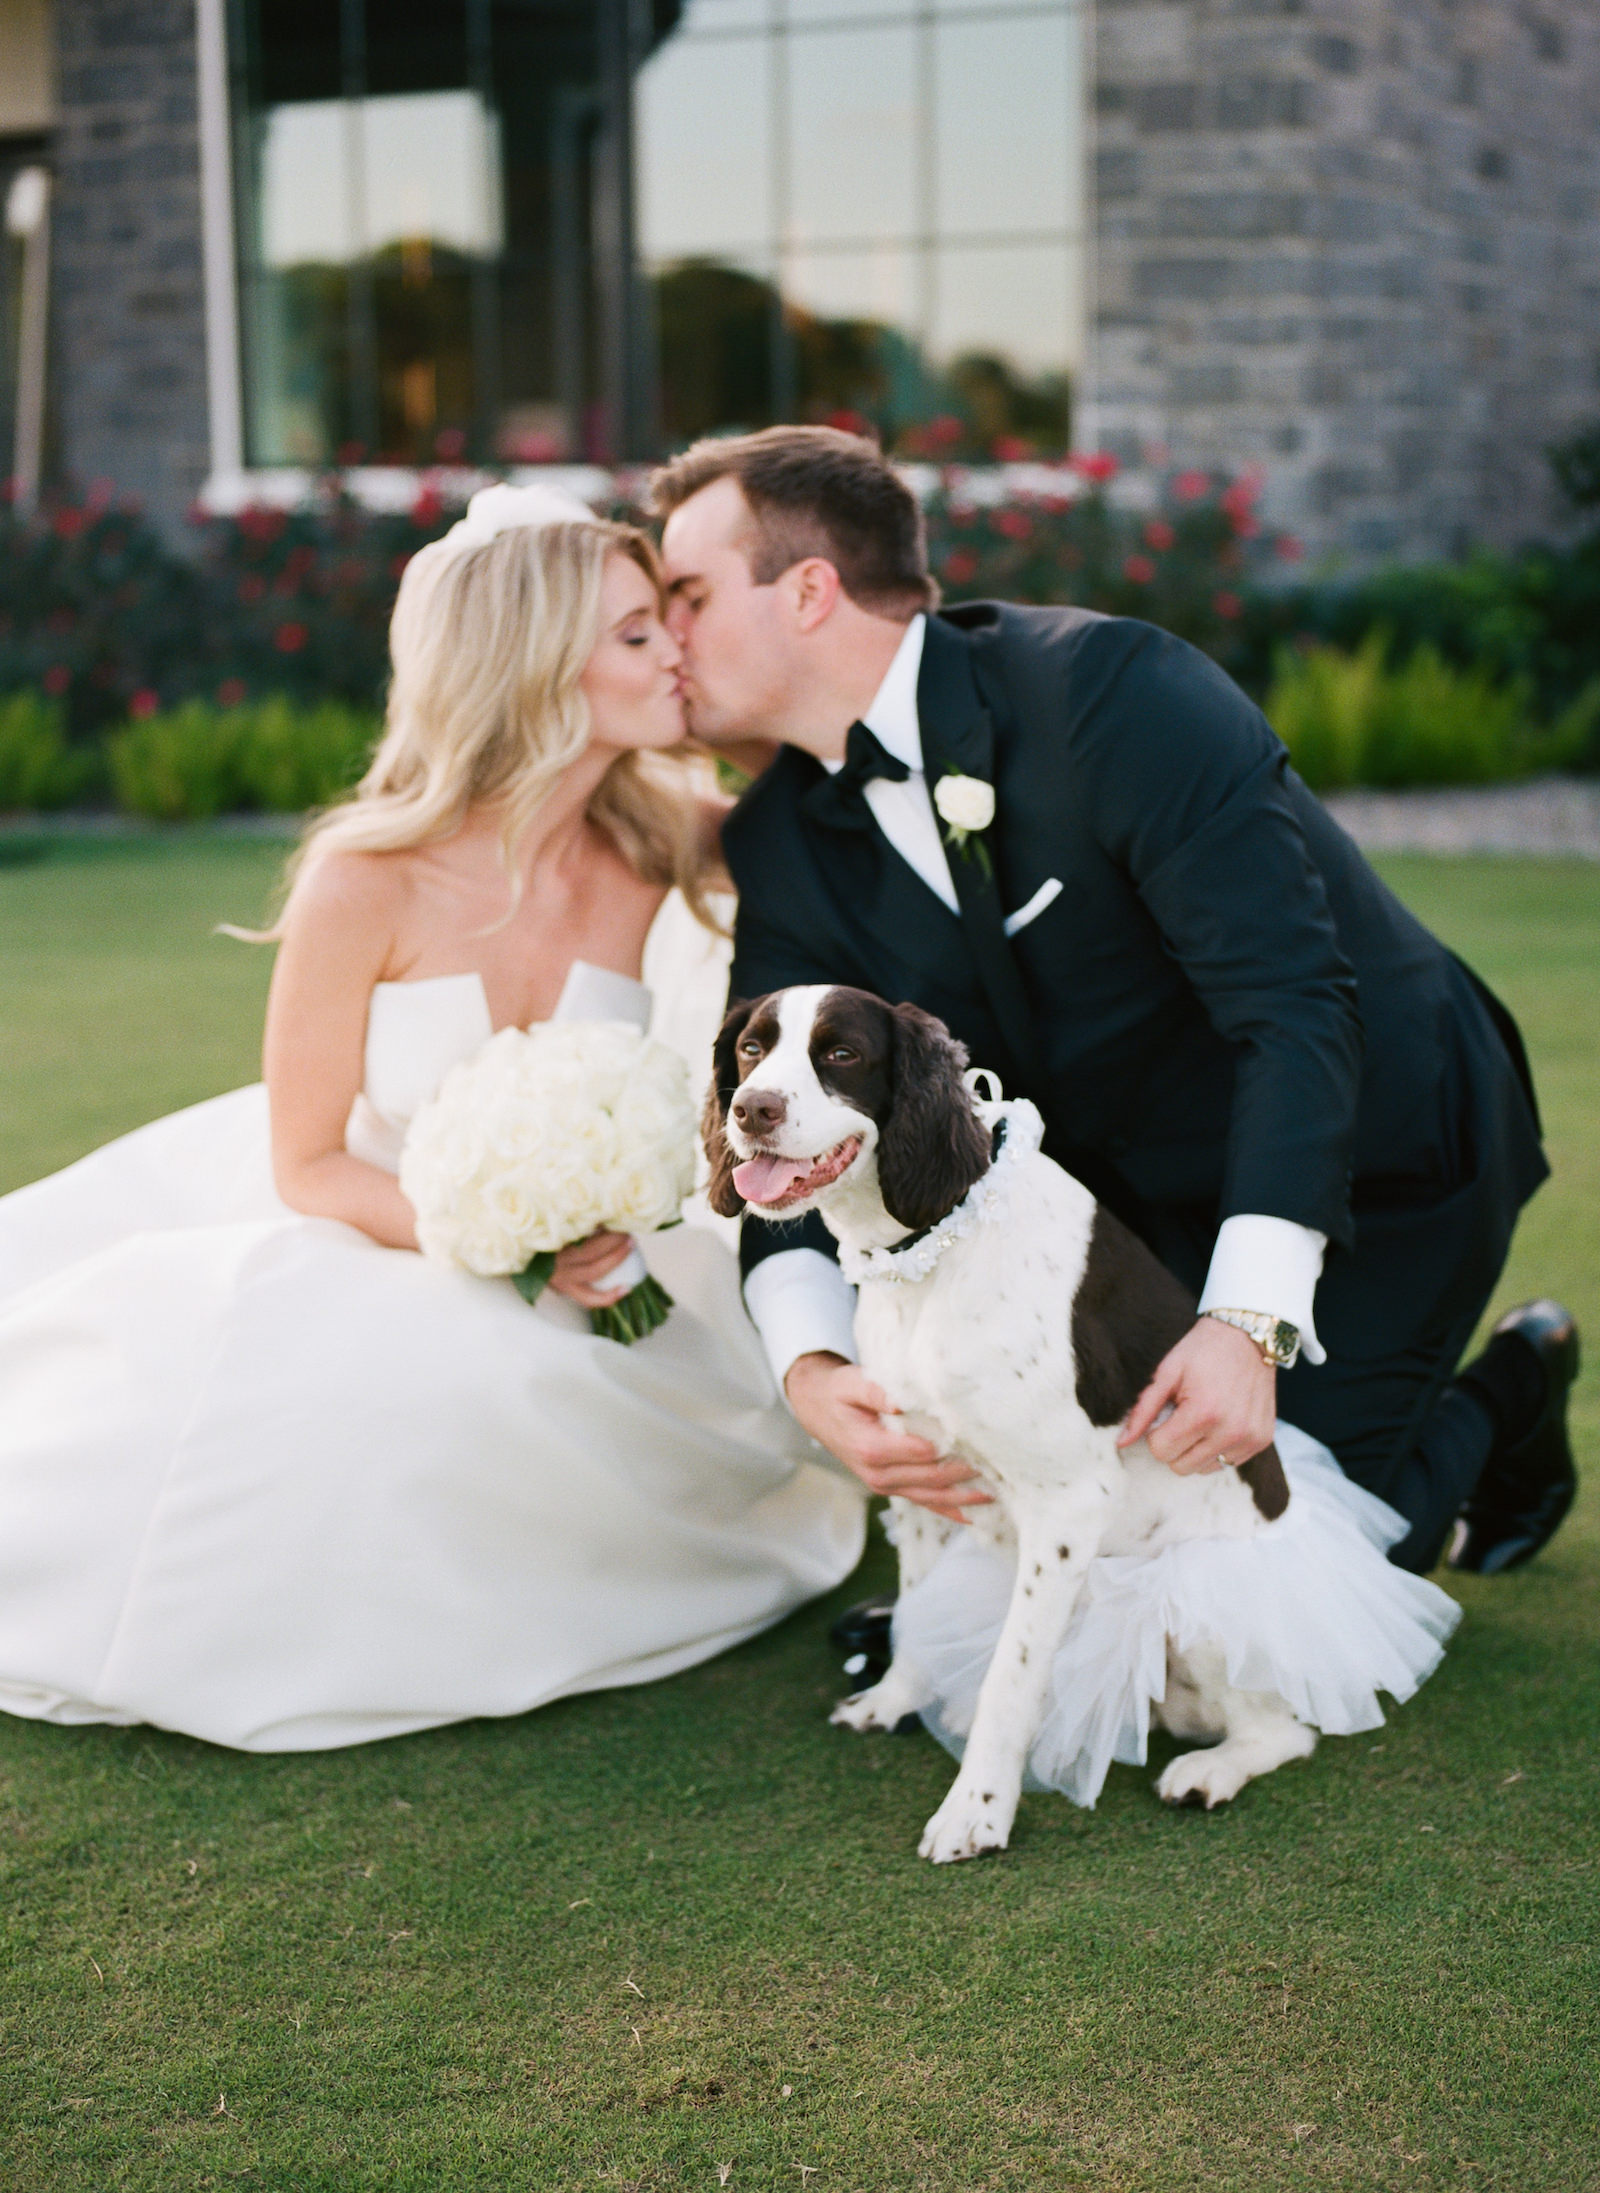 Luxurious All White Formal Wedding, Bride and Groom Kissing with Dog Wedding Photo | Tampa Bay Wedding Pet Planner FairyTail Pet Care